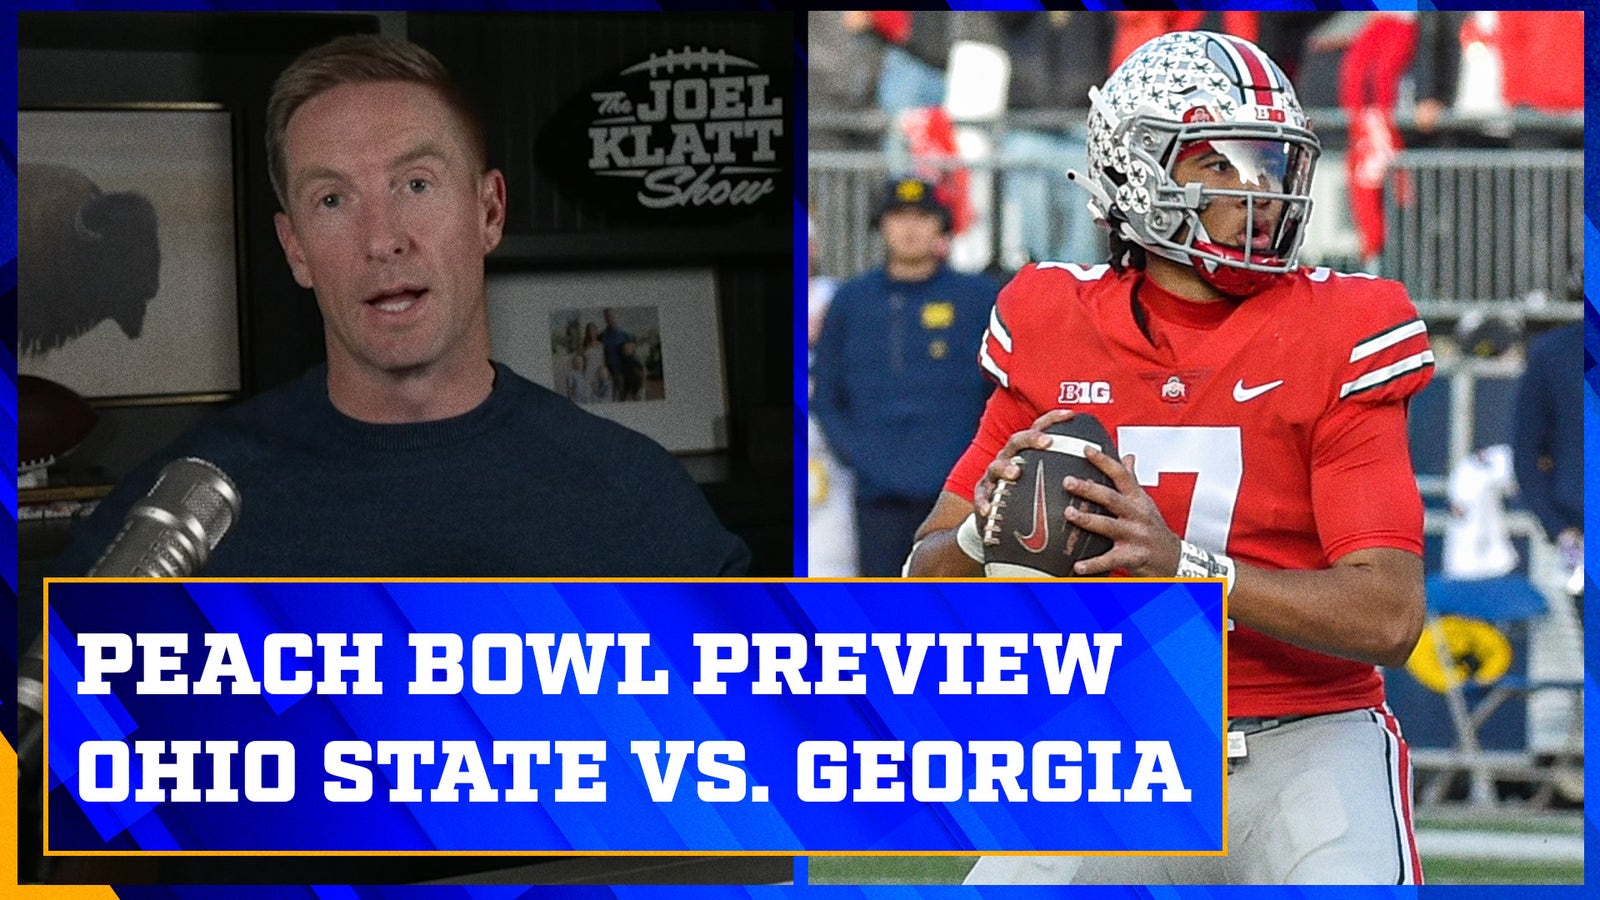 Why the Peach Bowl is a tough matchup for both teams